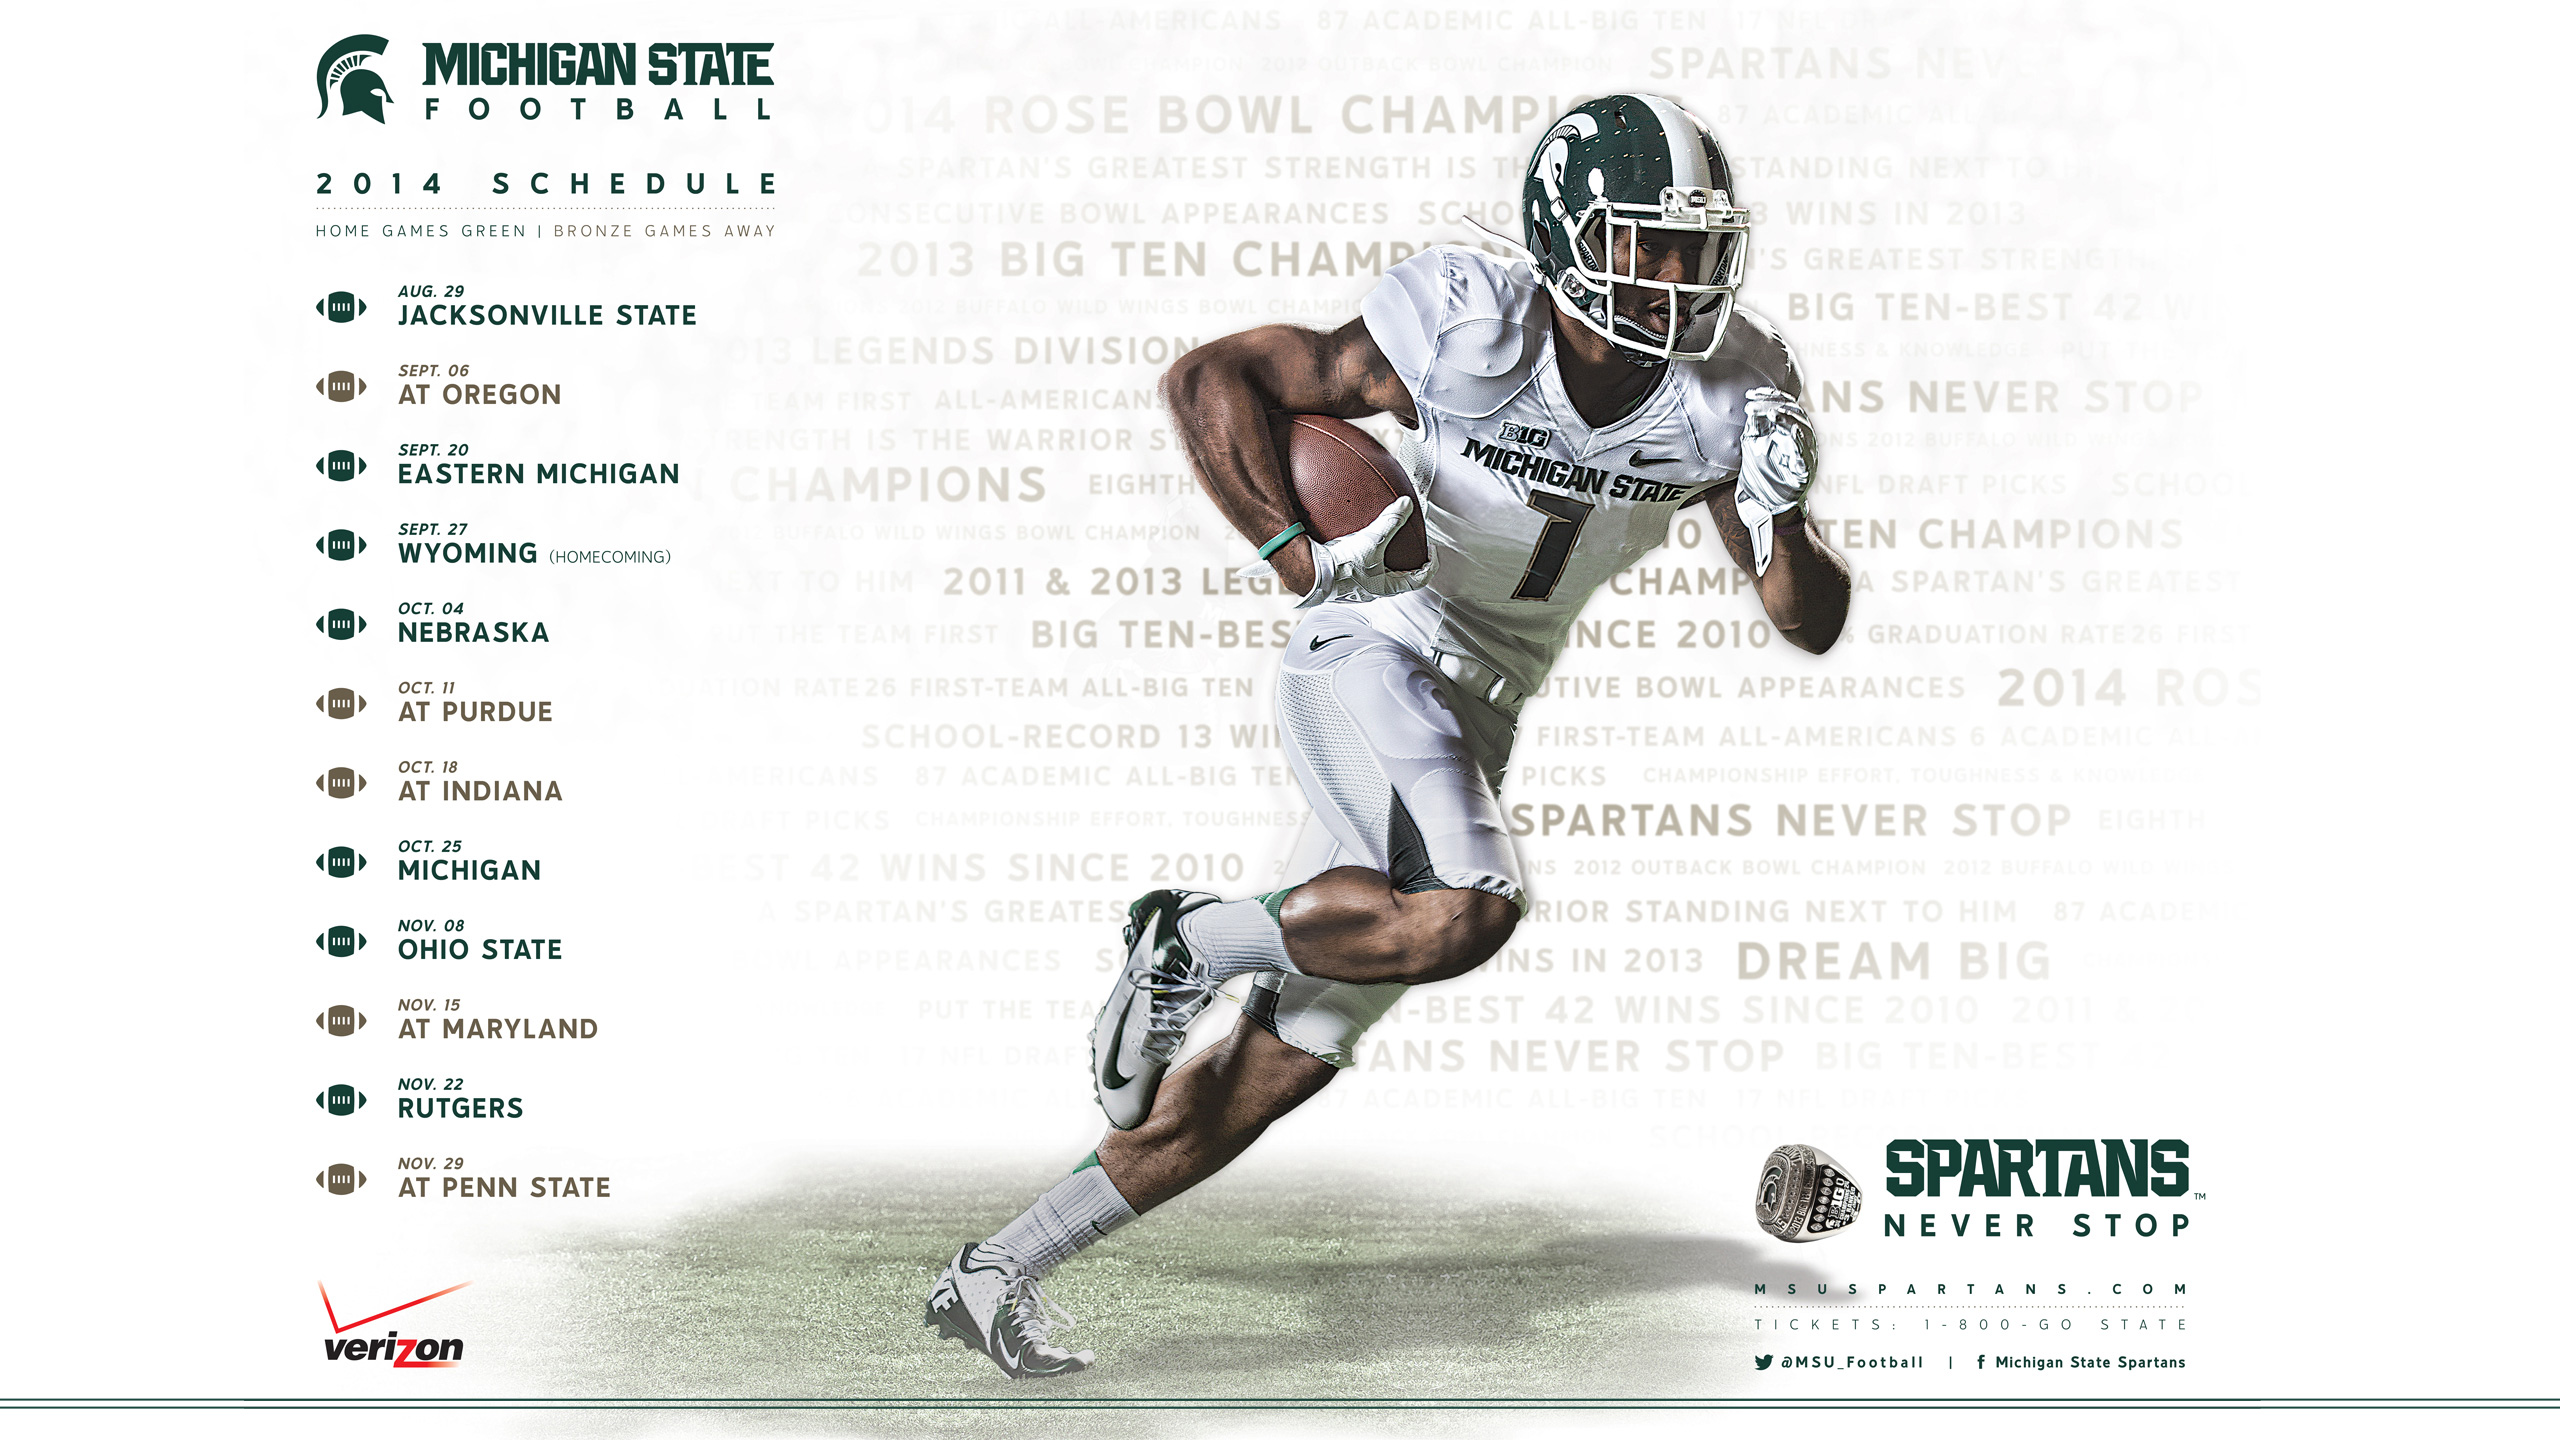 Michigan State Official Athletic Site 2560x1440